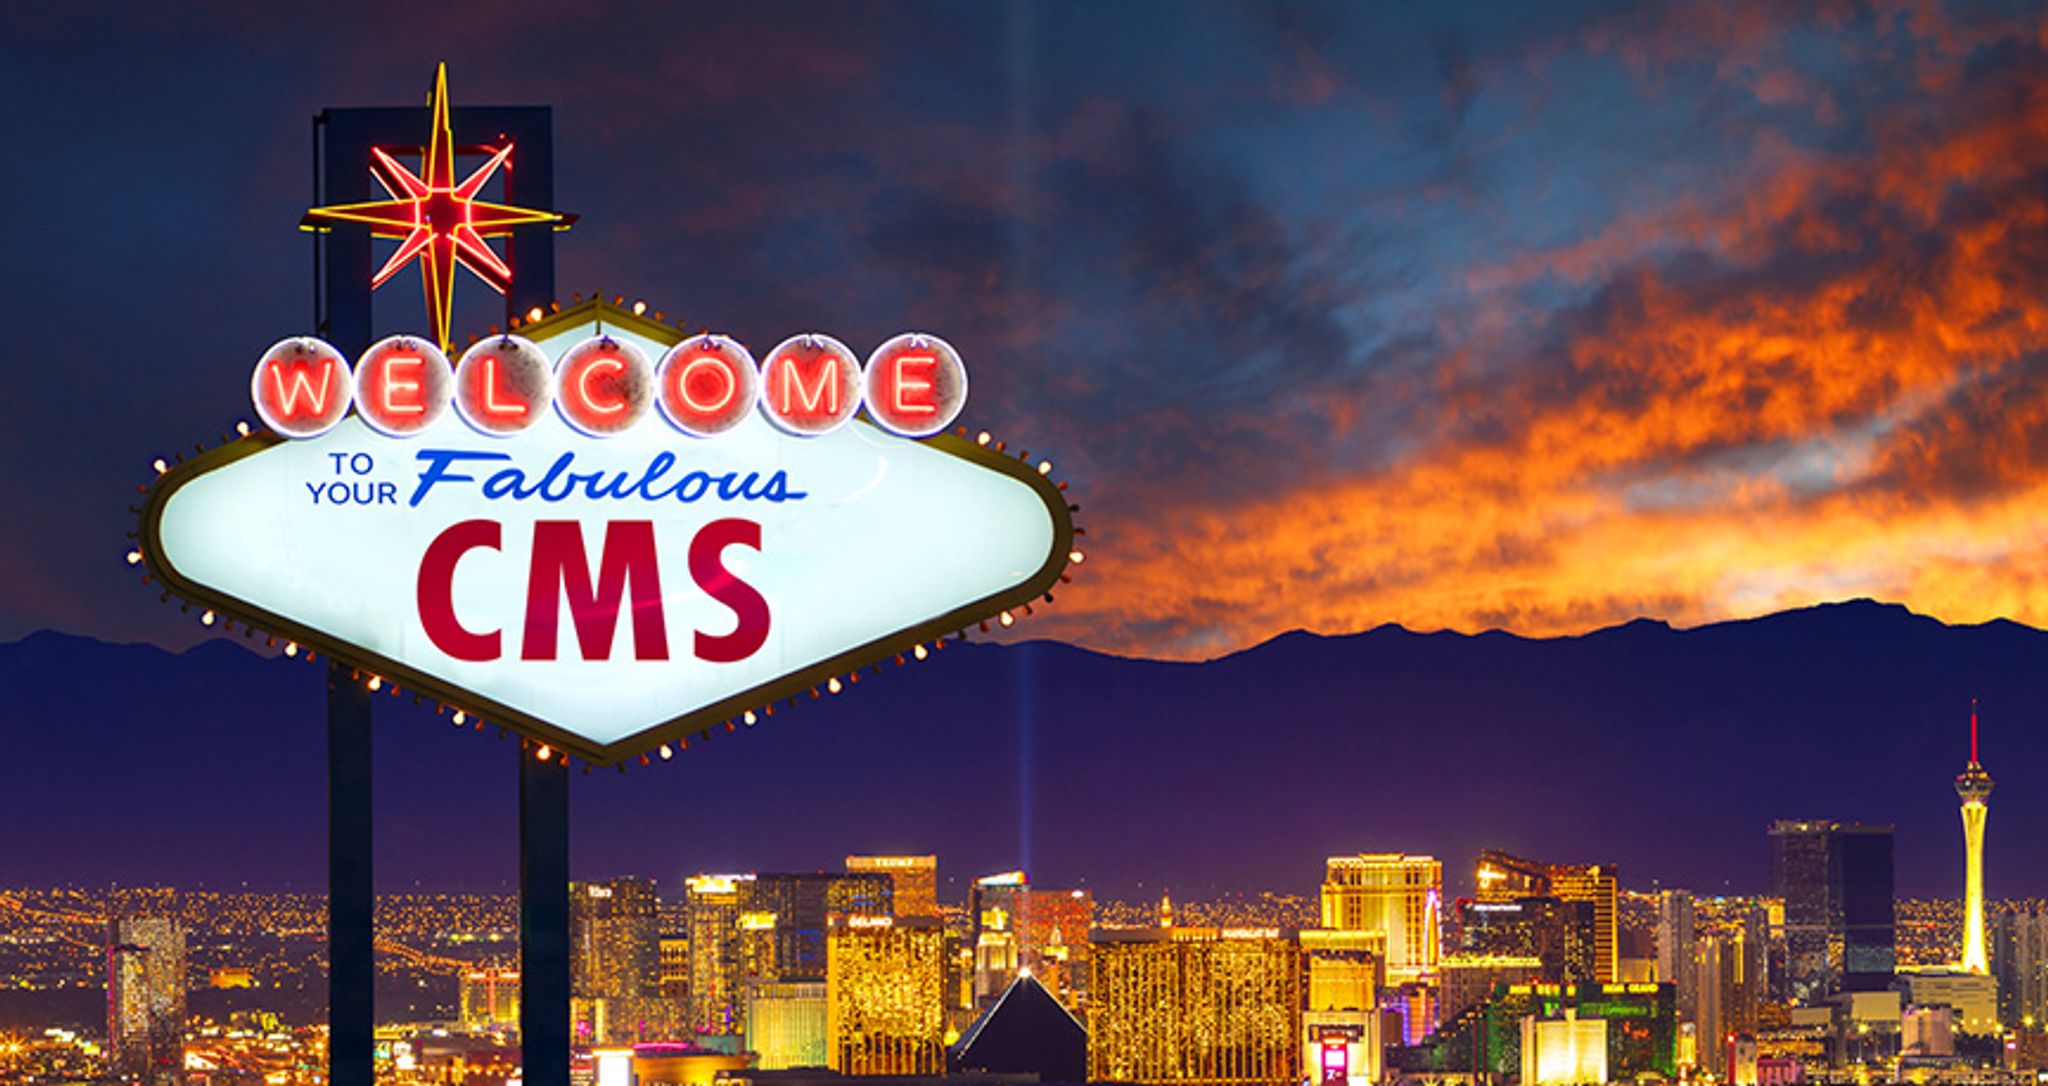 Las Vegas sign with text that reads "Welcome to your Fabulous CMS" instead of Las Vegas. Background of Las Vegas city skyline at night.